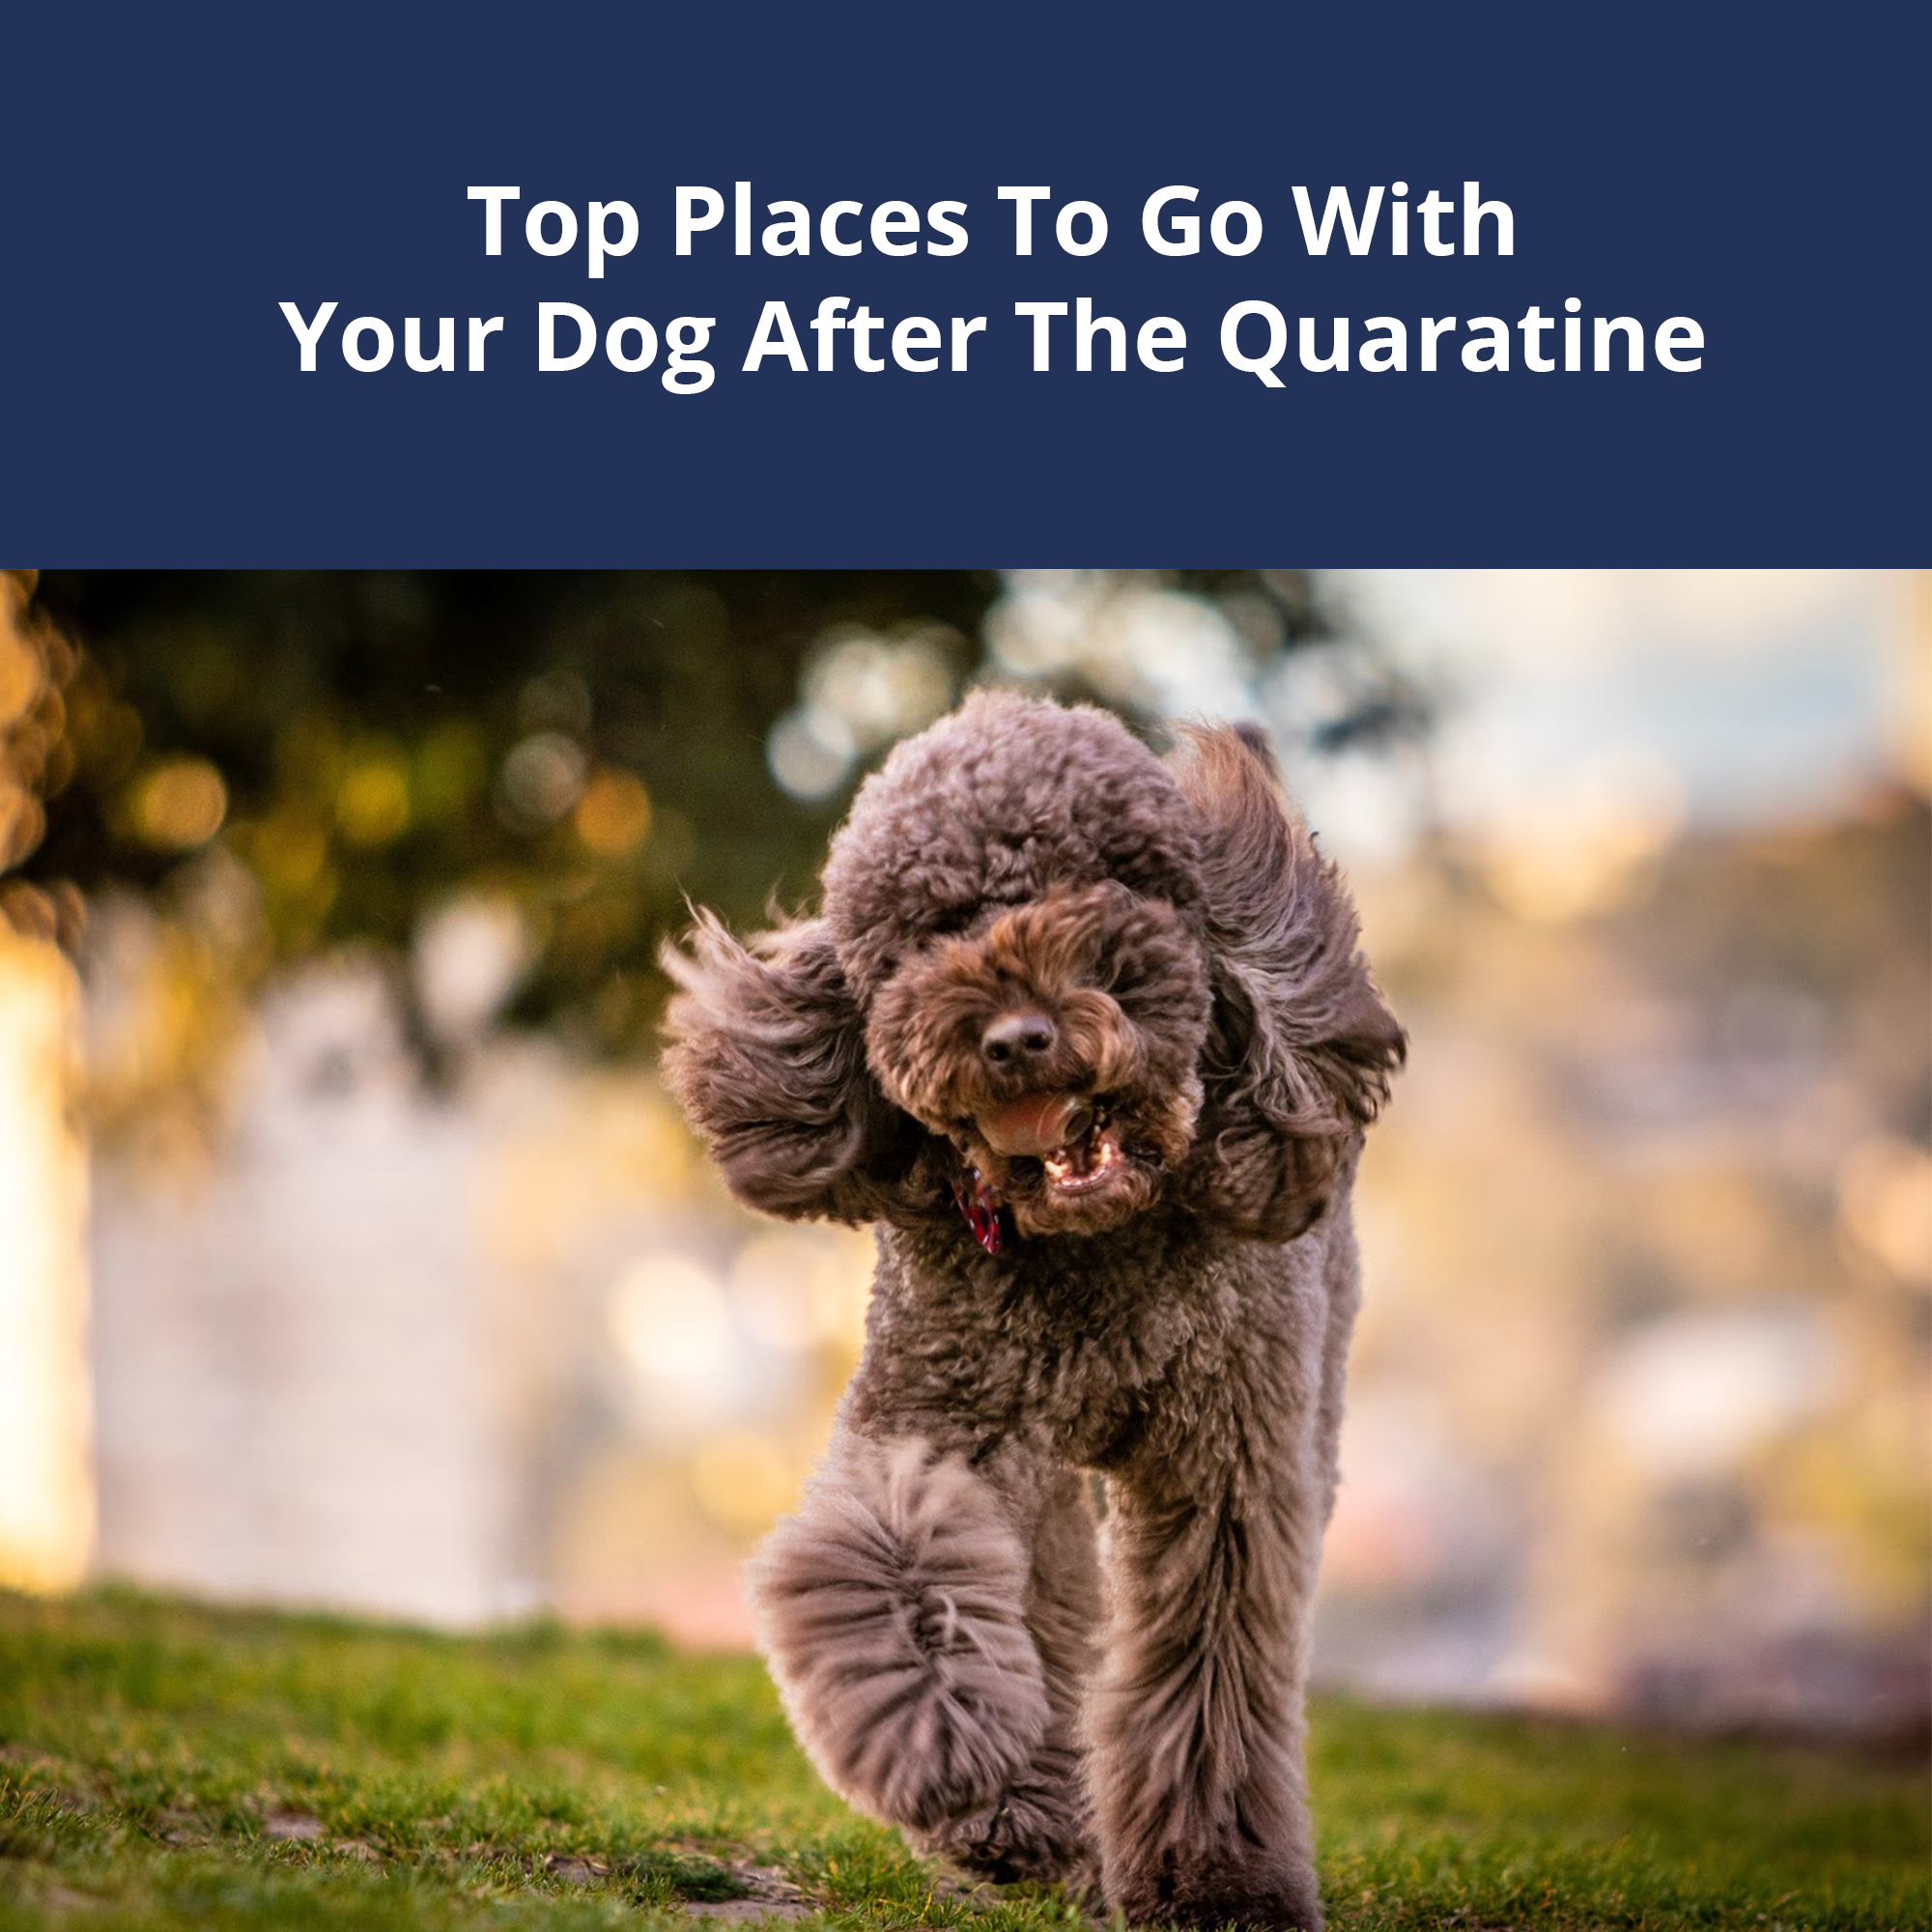 Top Places To Go With Your Dog After The Quarantine